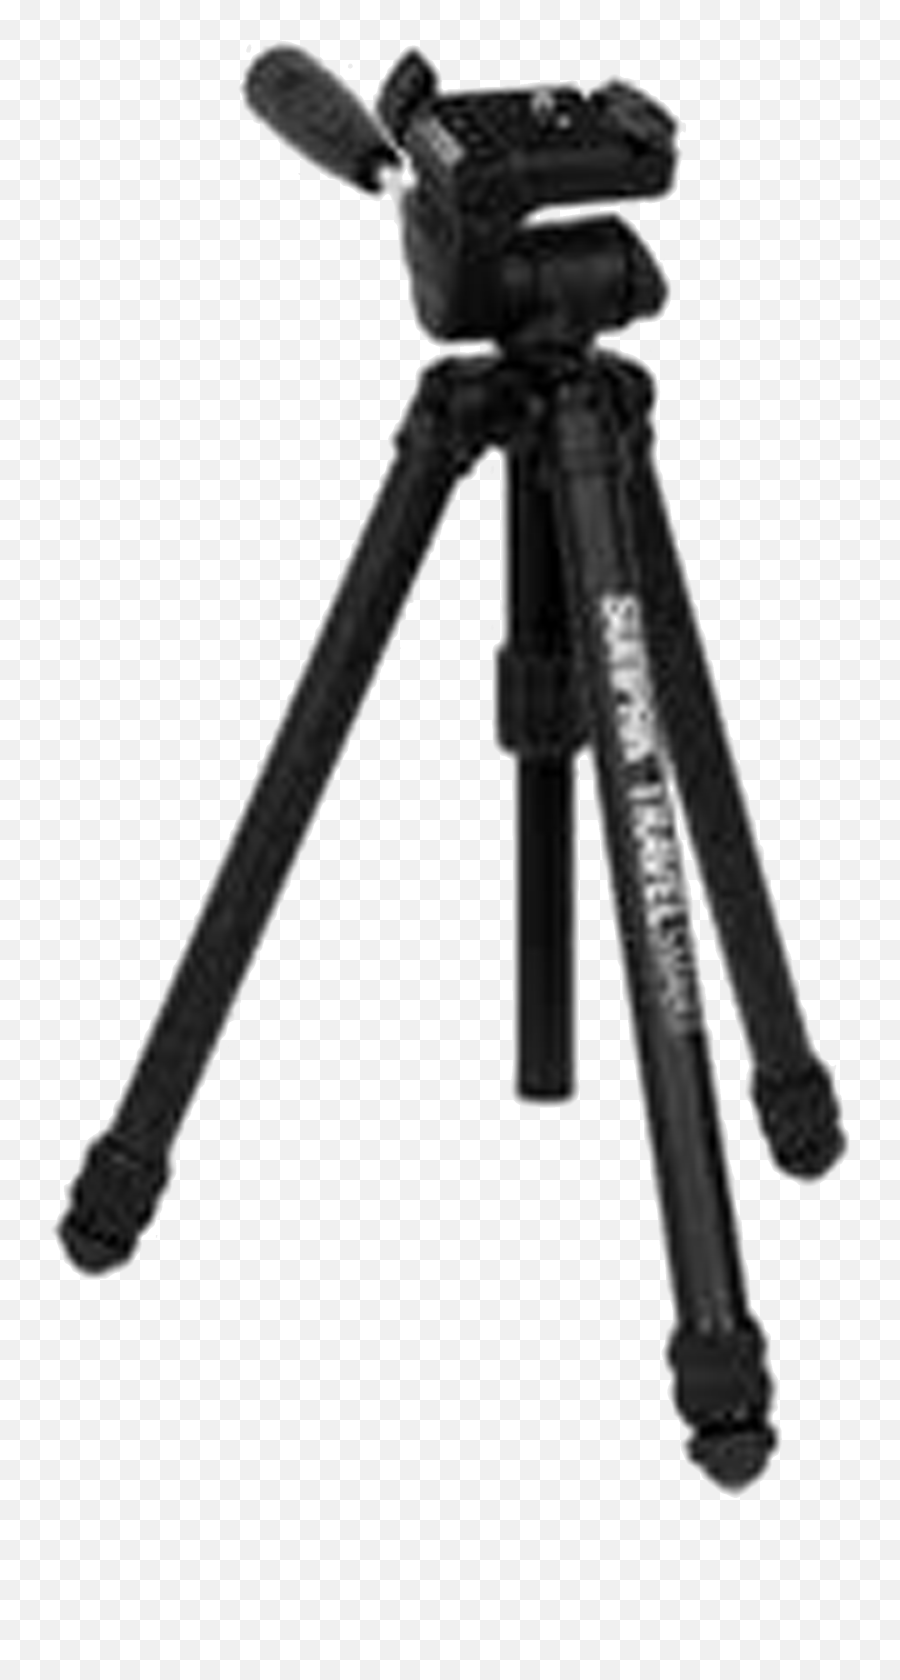 Tripod With Video Camera Png 39006 - Free Icons And Png Tripod On Transparent Background Hd,Video Camera Png